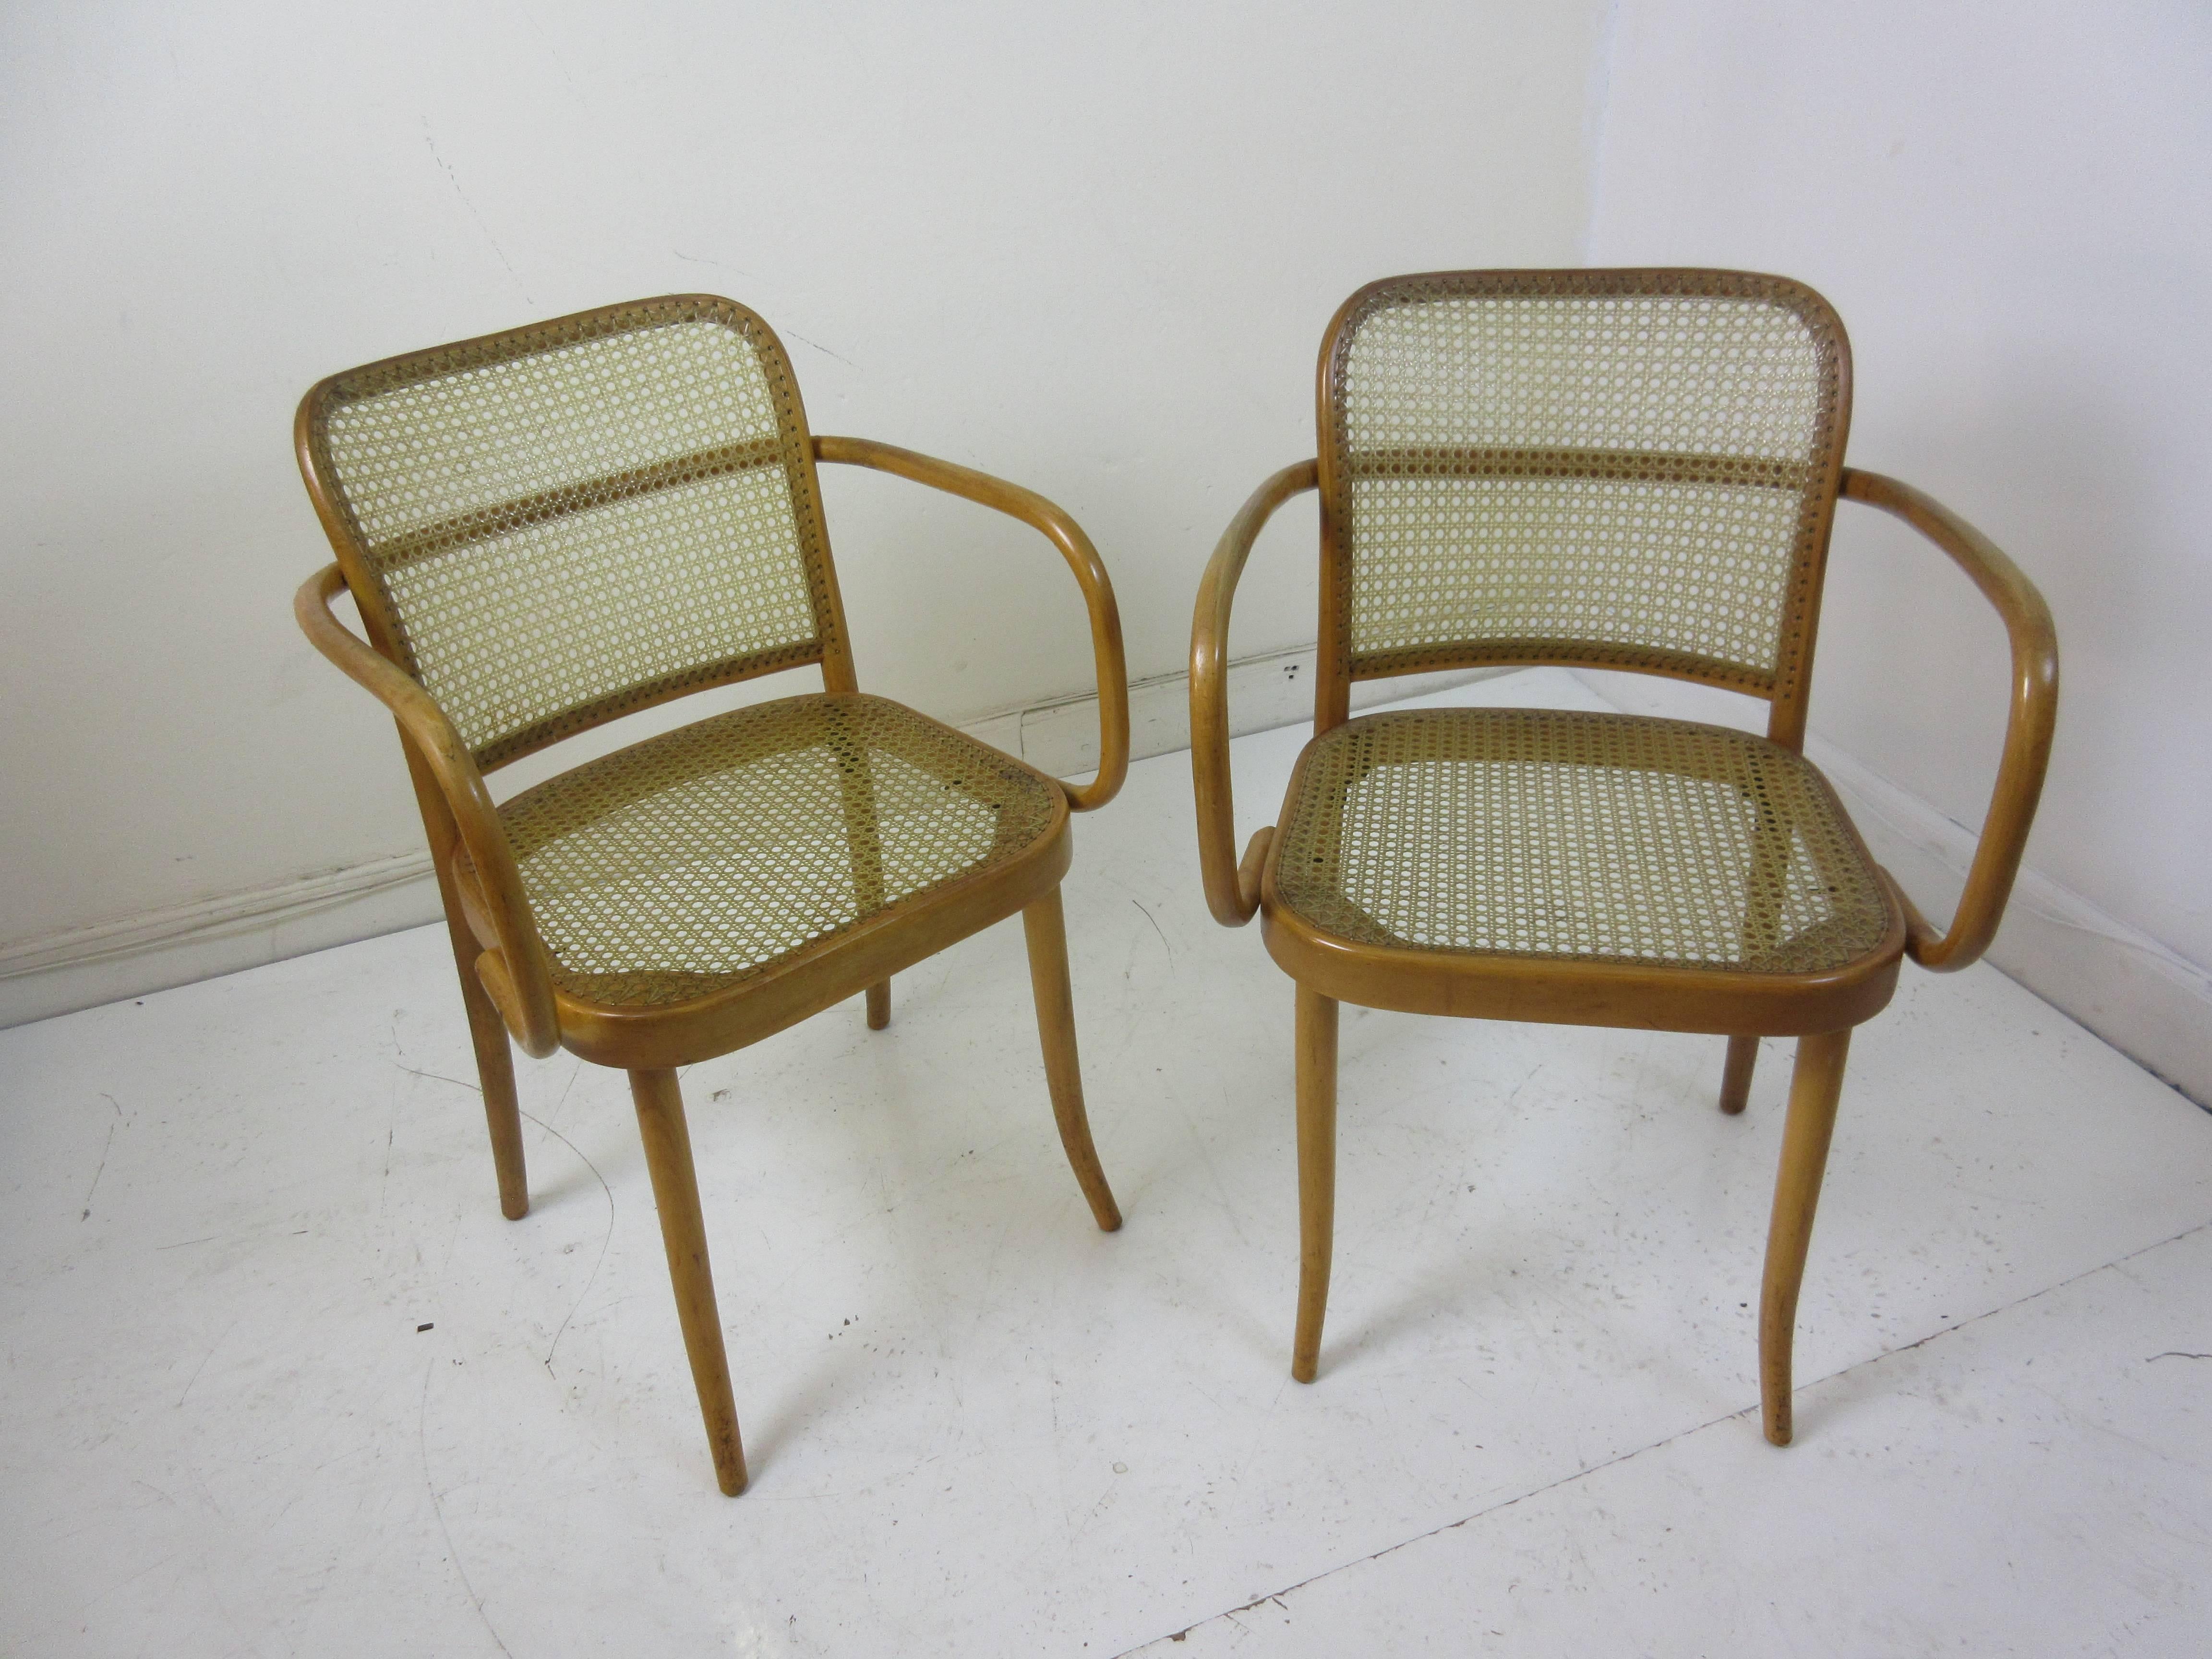 Josef Hoffman Prague 811 chairs by Stendig from the 1960s with hand tied nylon 